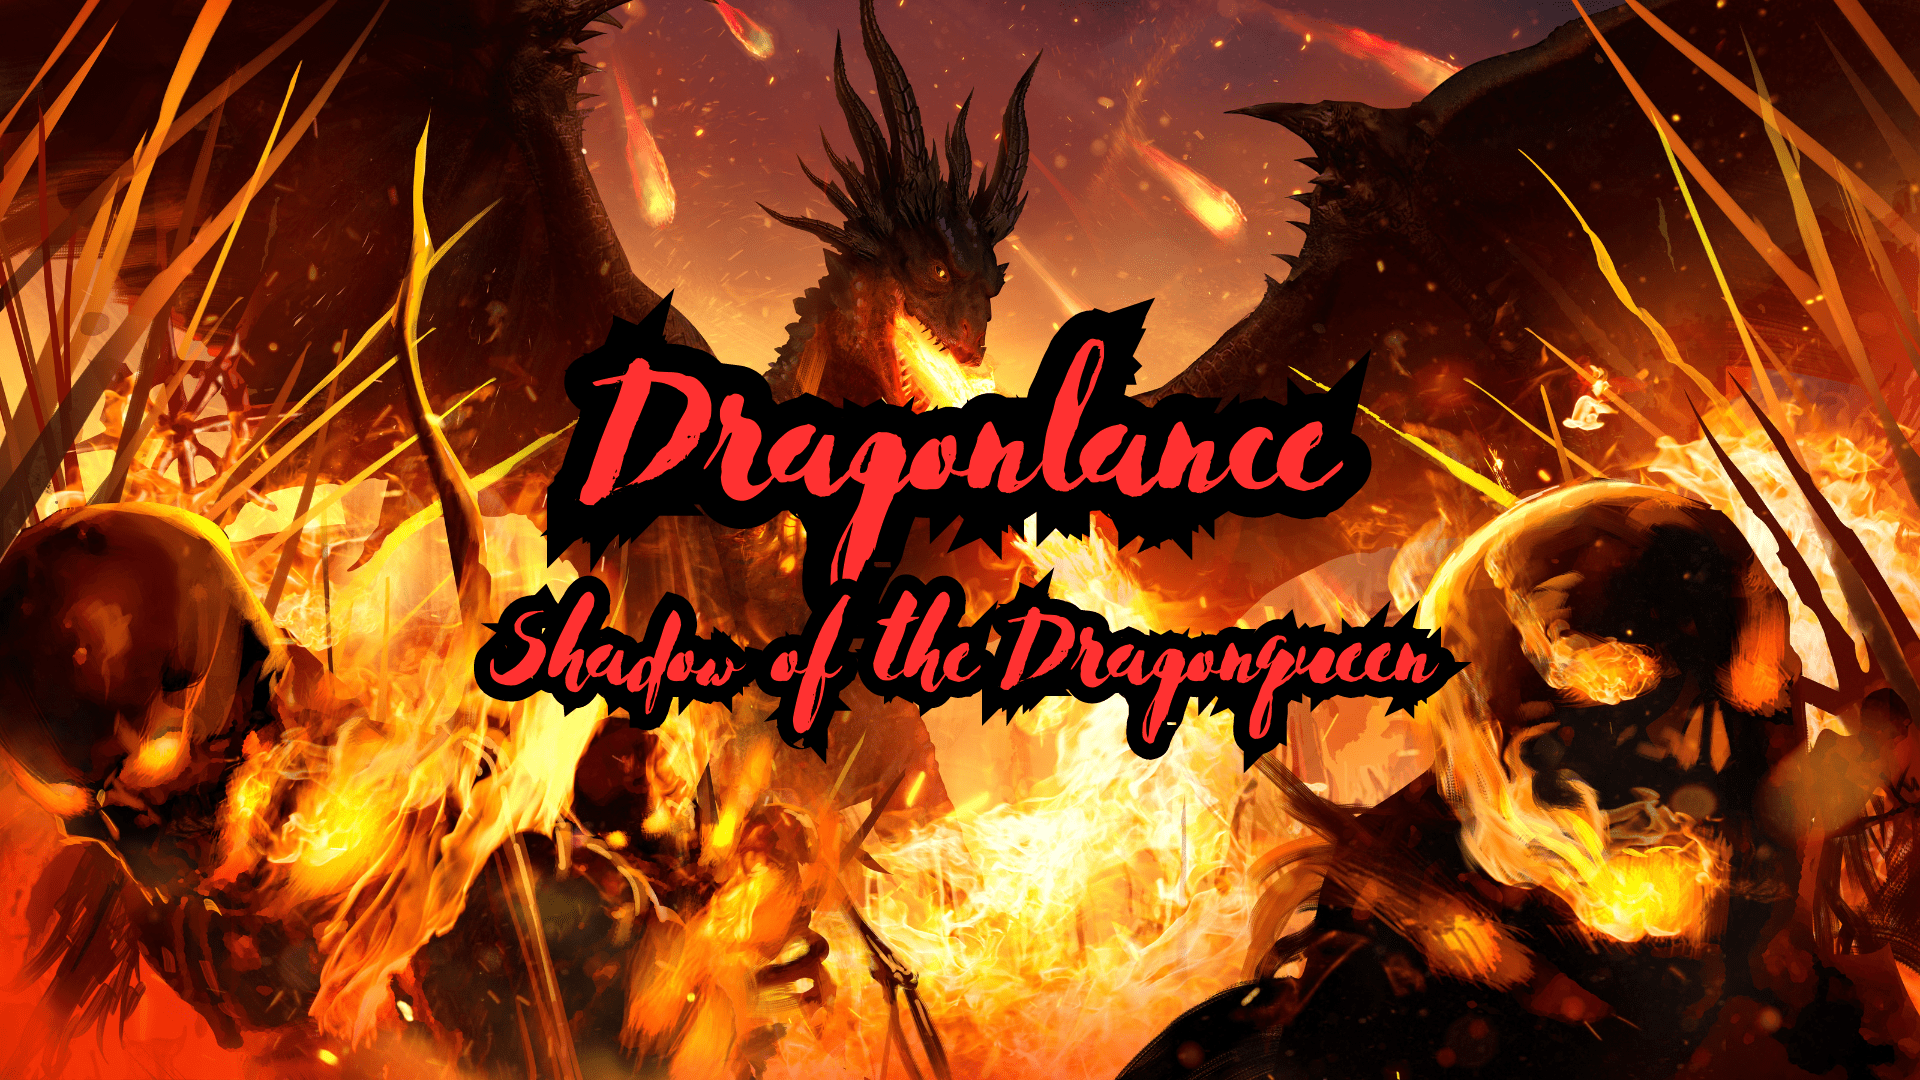 [Dungeons & Dragons 5e] Dragonlance: Shadow of the Dragonqueen